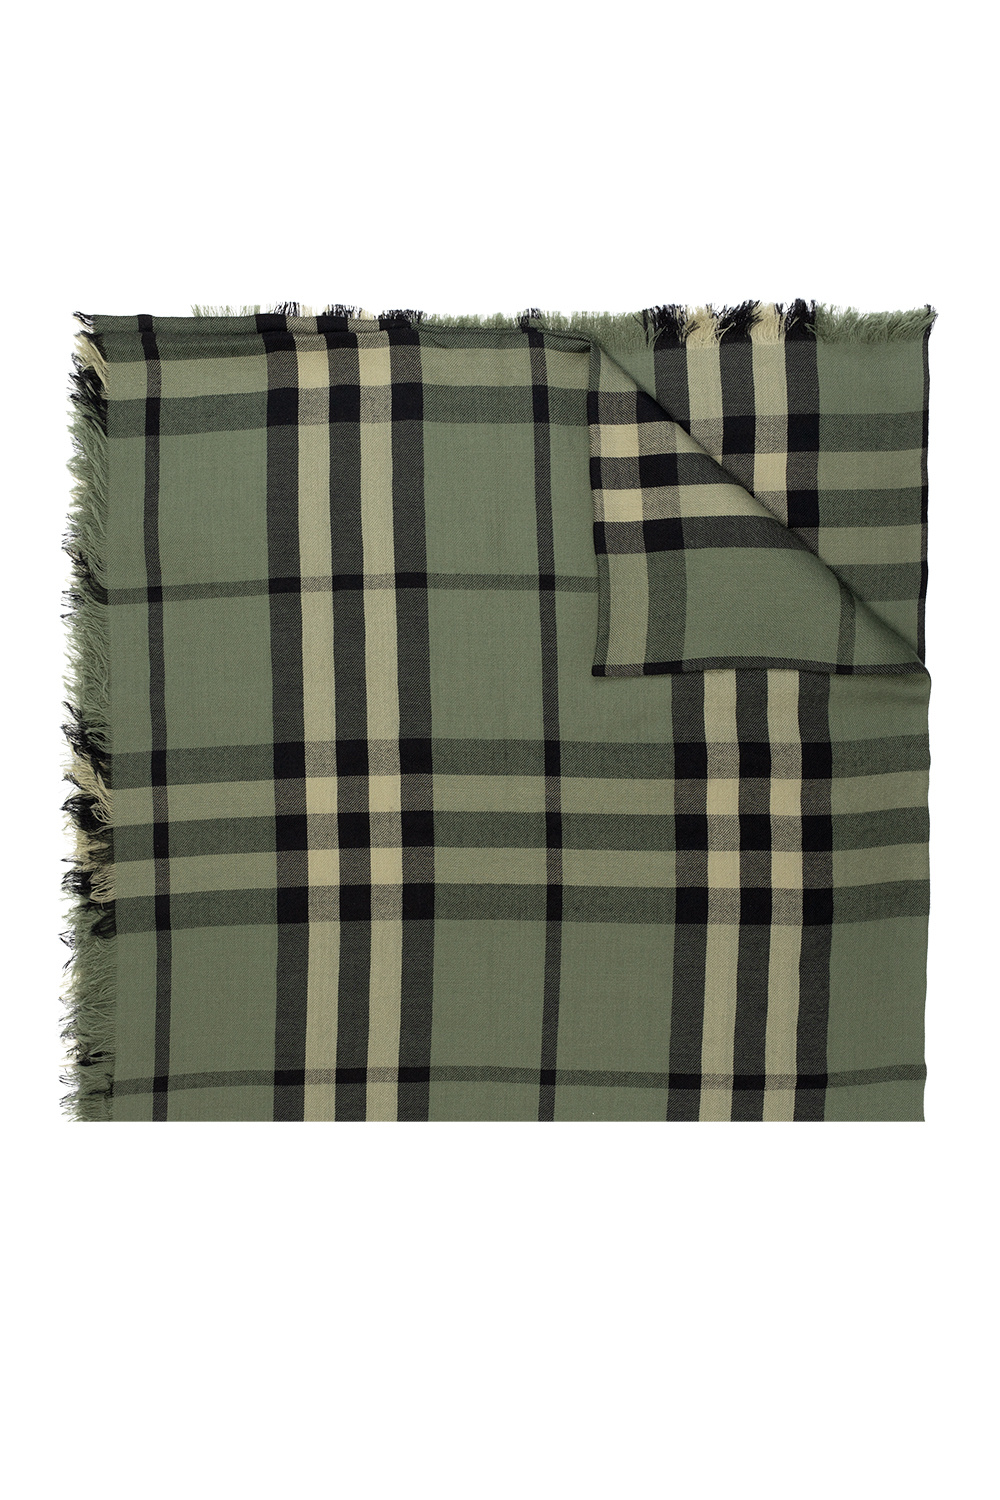 burberry brown Checked scarf